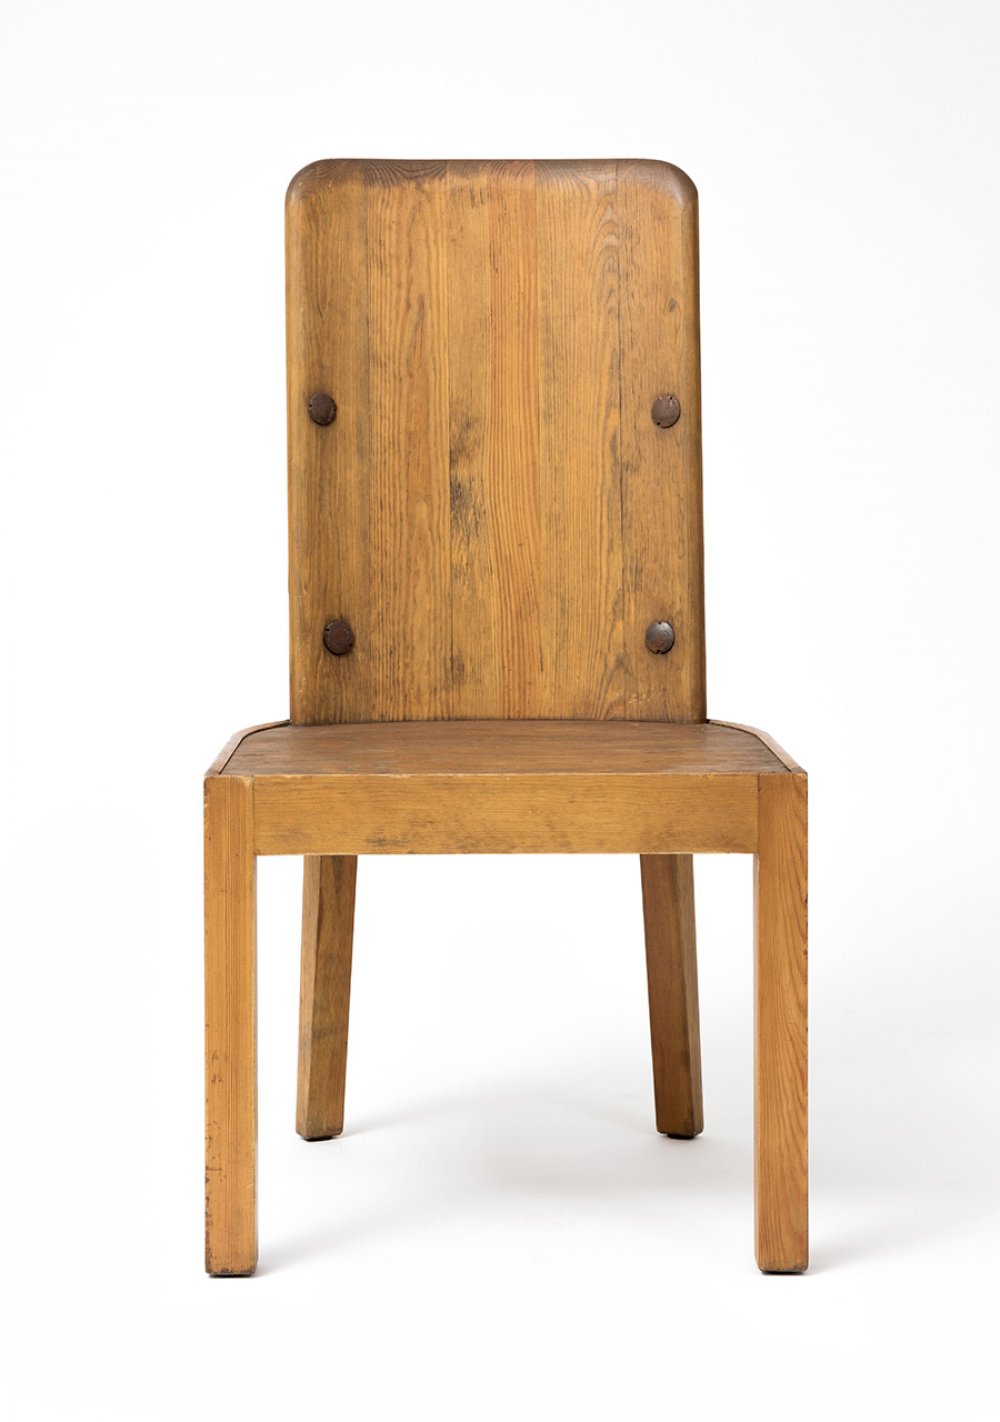 AXEL EINAR HJORTH (Sweden, 1888-1959).Lovö Chair.Wood.With marks of use.Measurements: 93,5 x 48 x 48 - Image 8 of 8